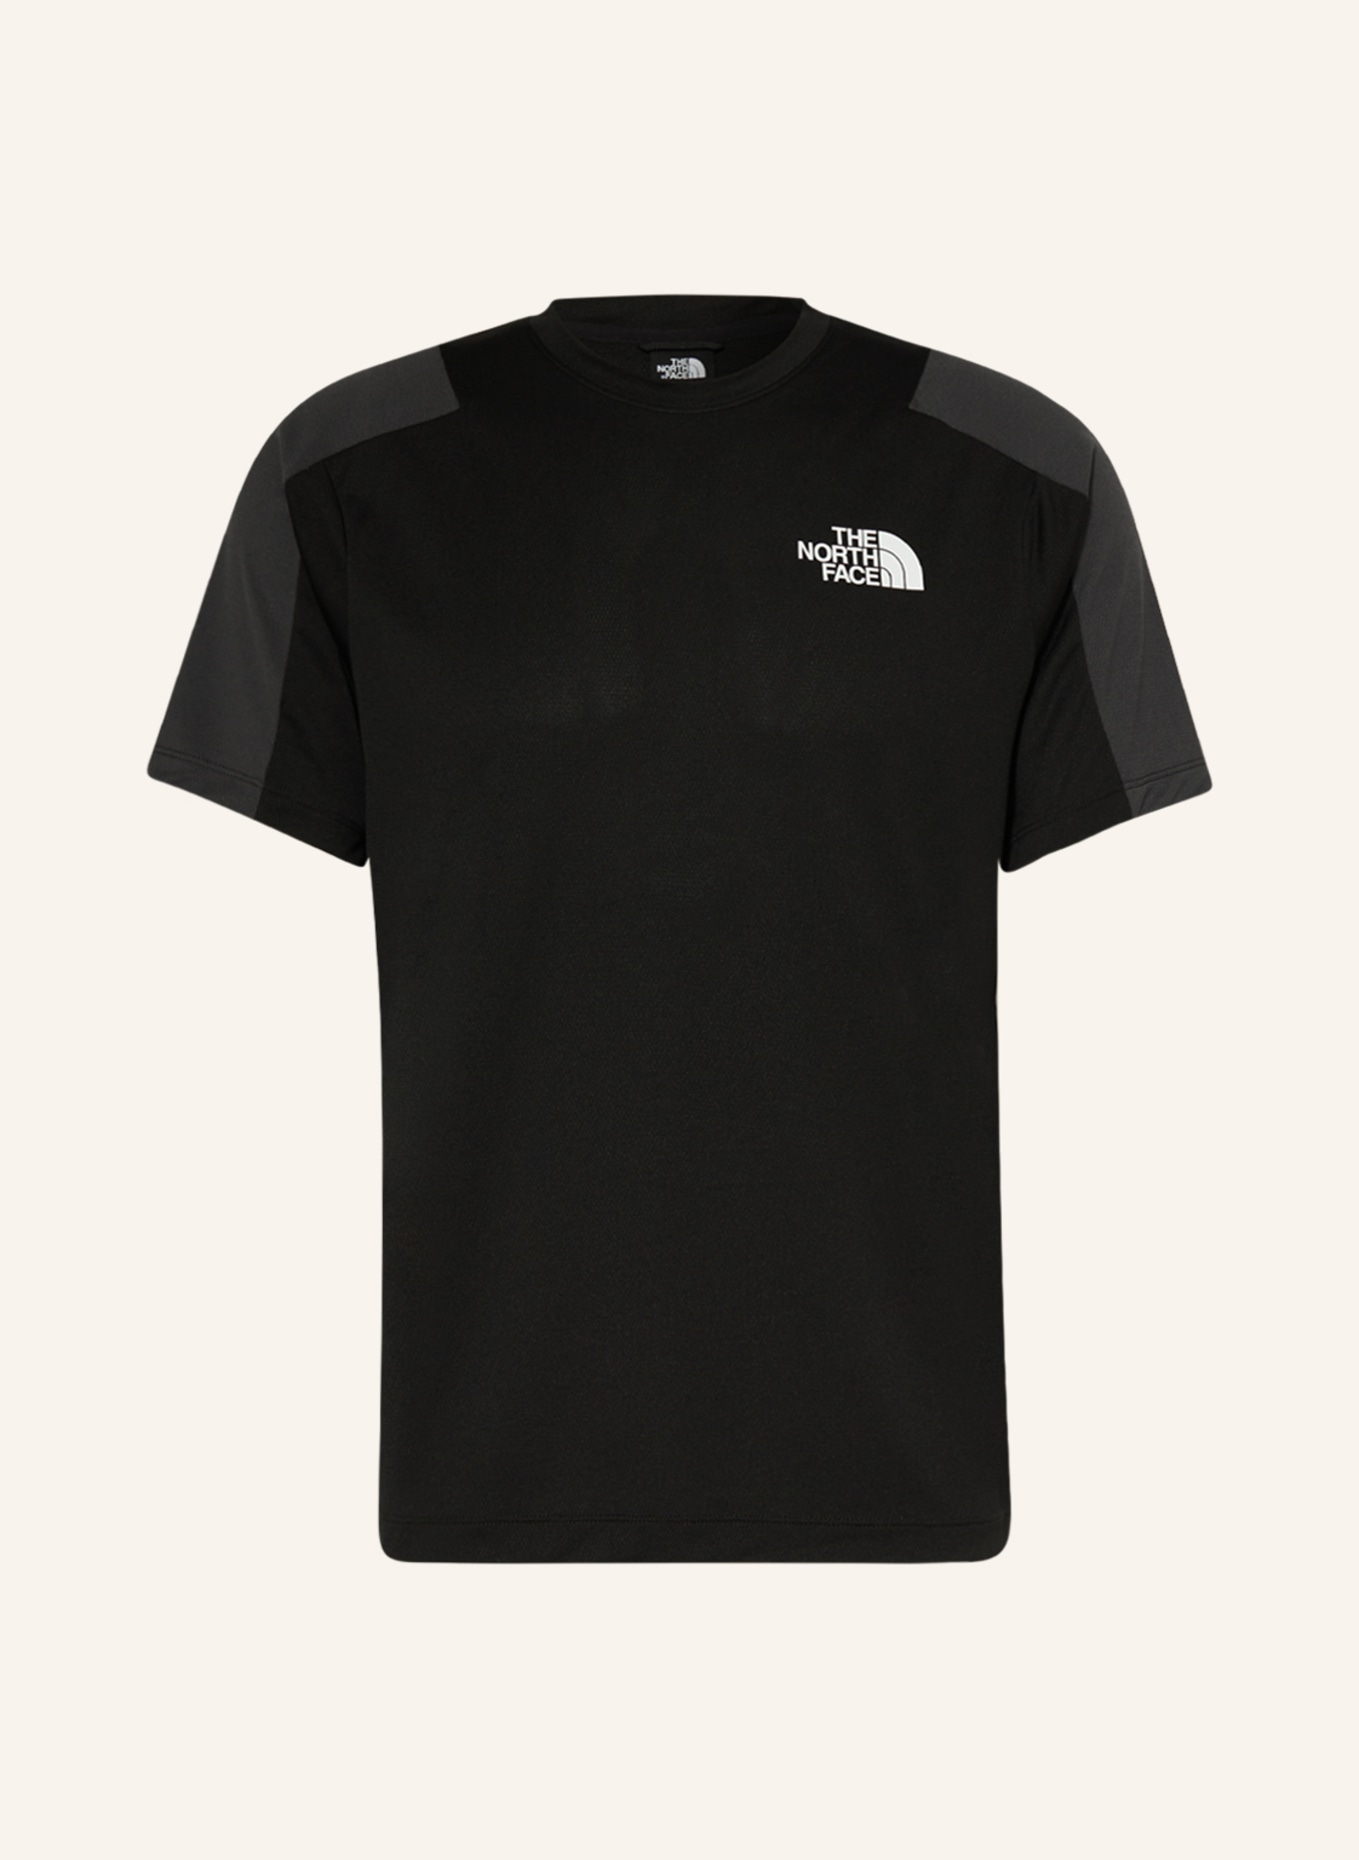 THE NORTH FACE T-shirt made mesh in